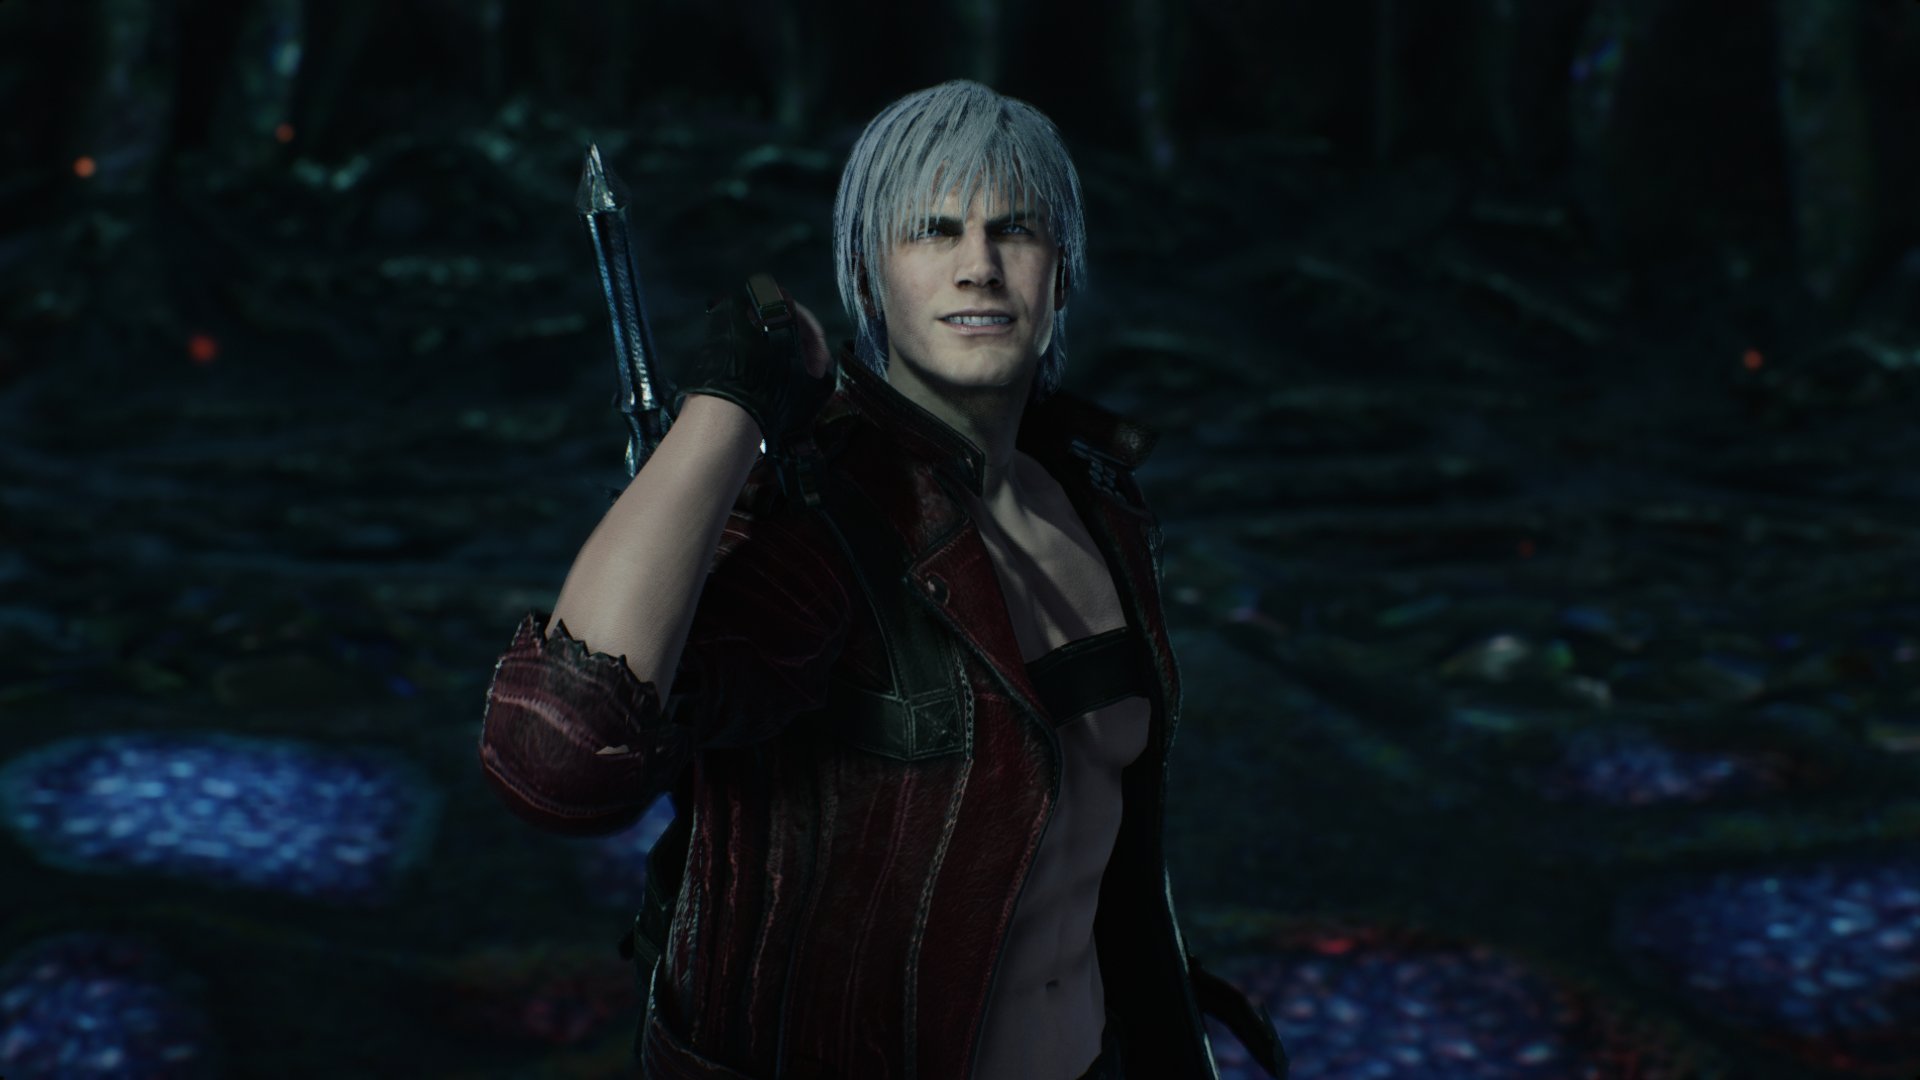 forredgrave45 on X: DMC 3 Dante Mod made by evilmaginakuma..the costume  is in his patreon but the hair you can find it on nexus. patreon:   DMC 3 hair:  #DMC5 #DMC3 #